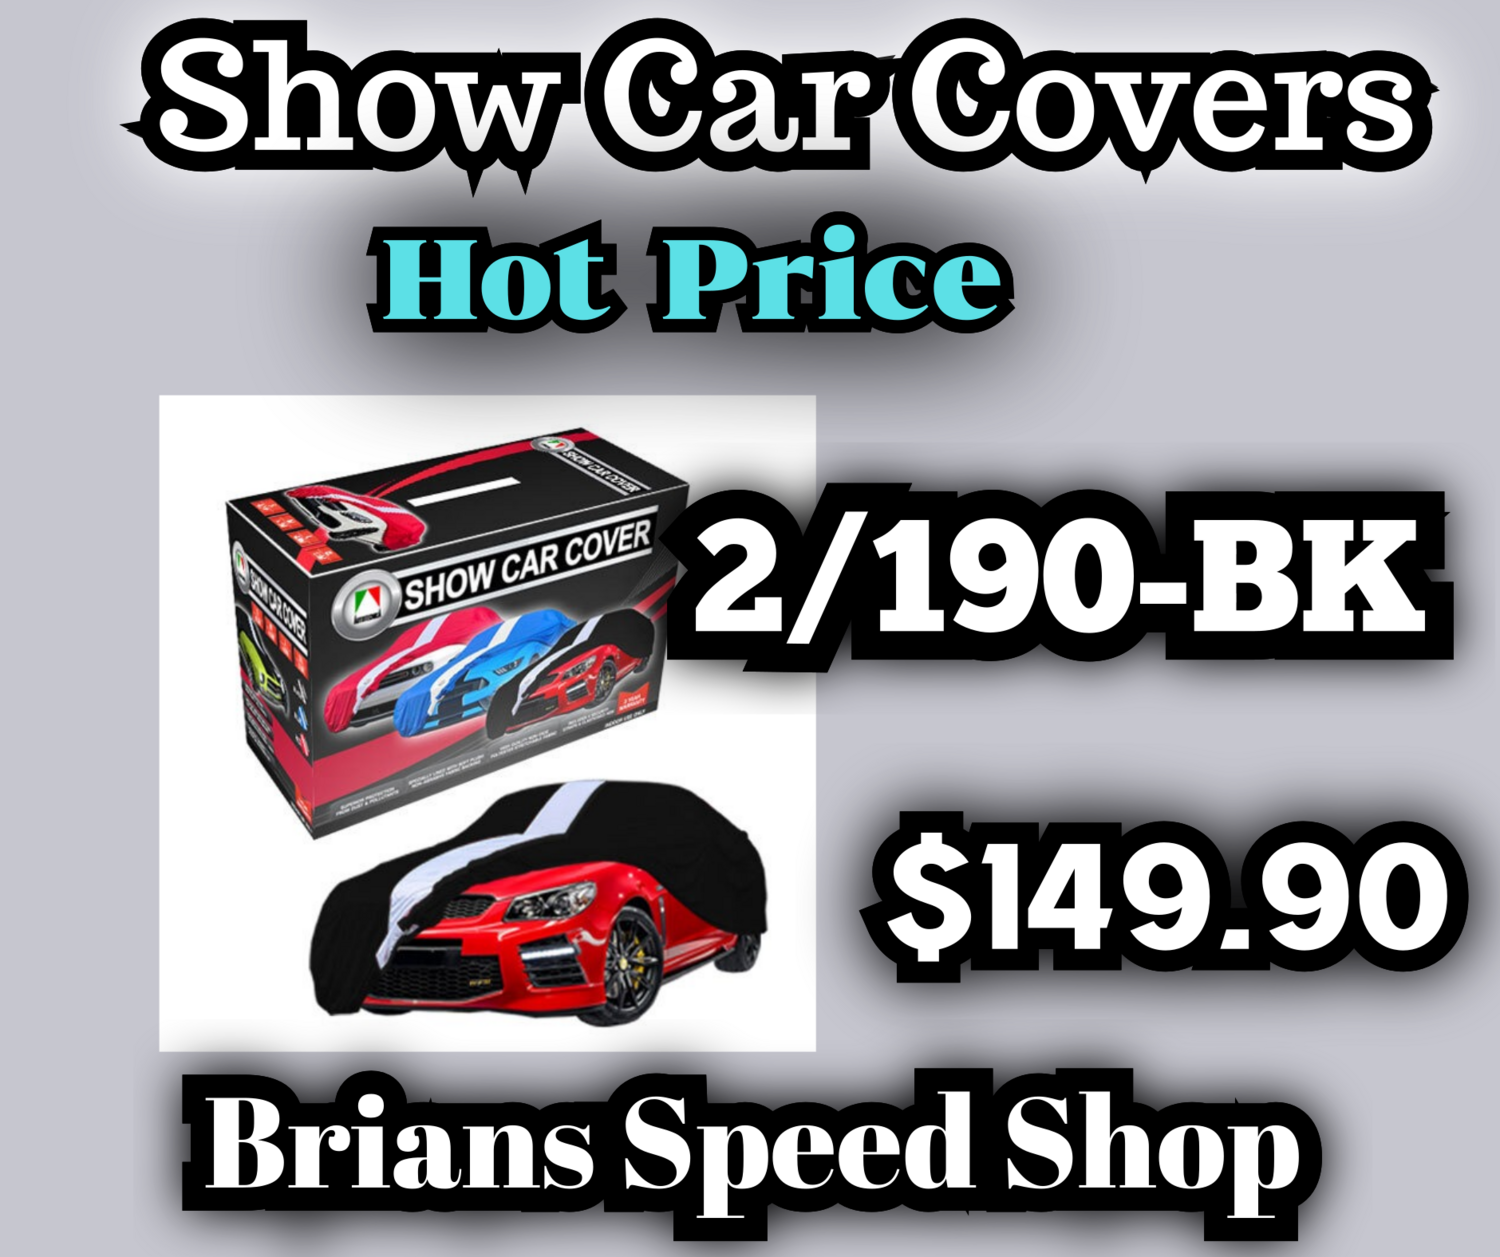 2/190BK The ultimate protection Show Car Cover for indoor It has superior protection from dust and pollutants and is constructed with the most high quality non fad polyester stretchable fabric.$149.90